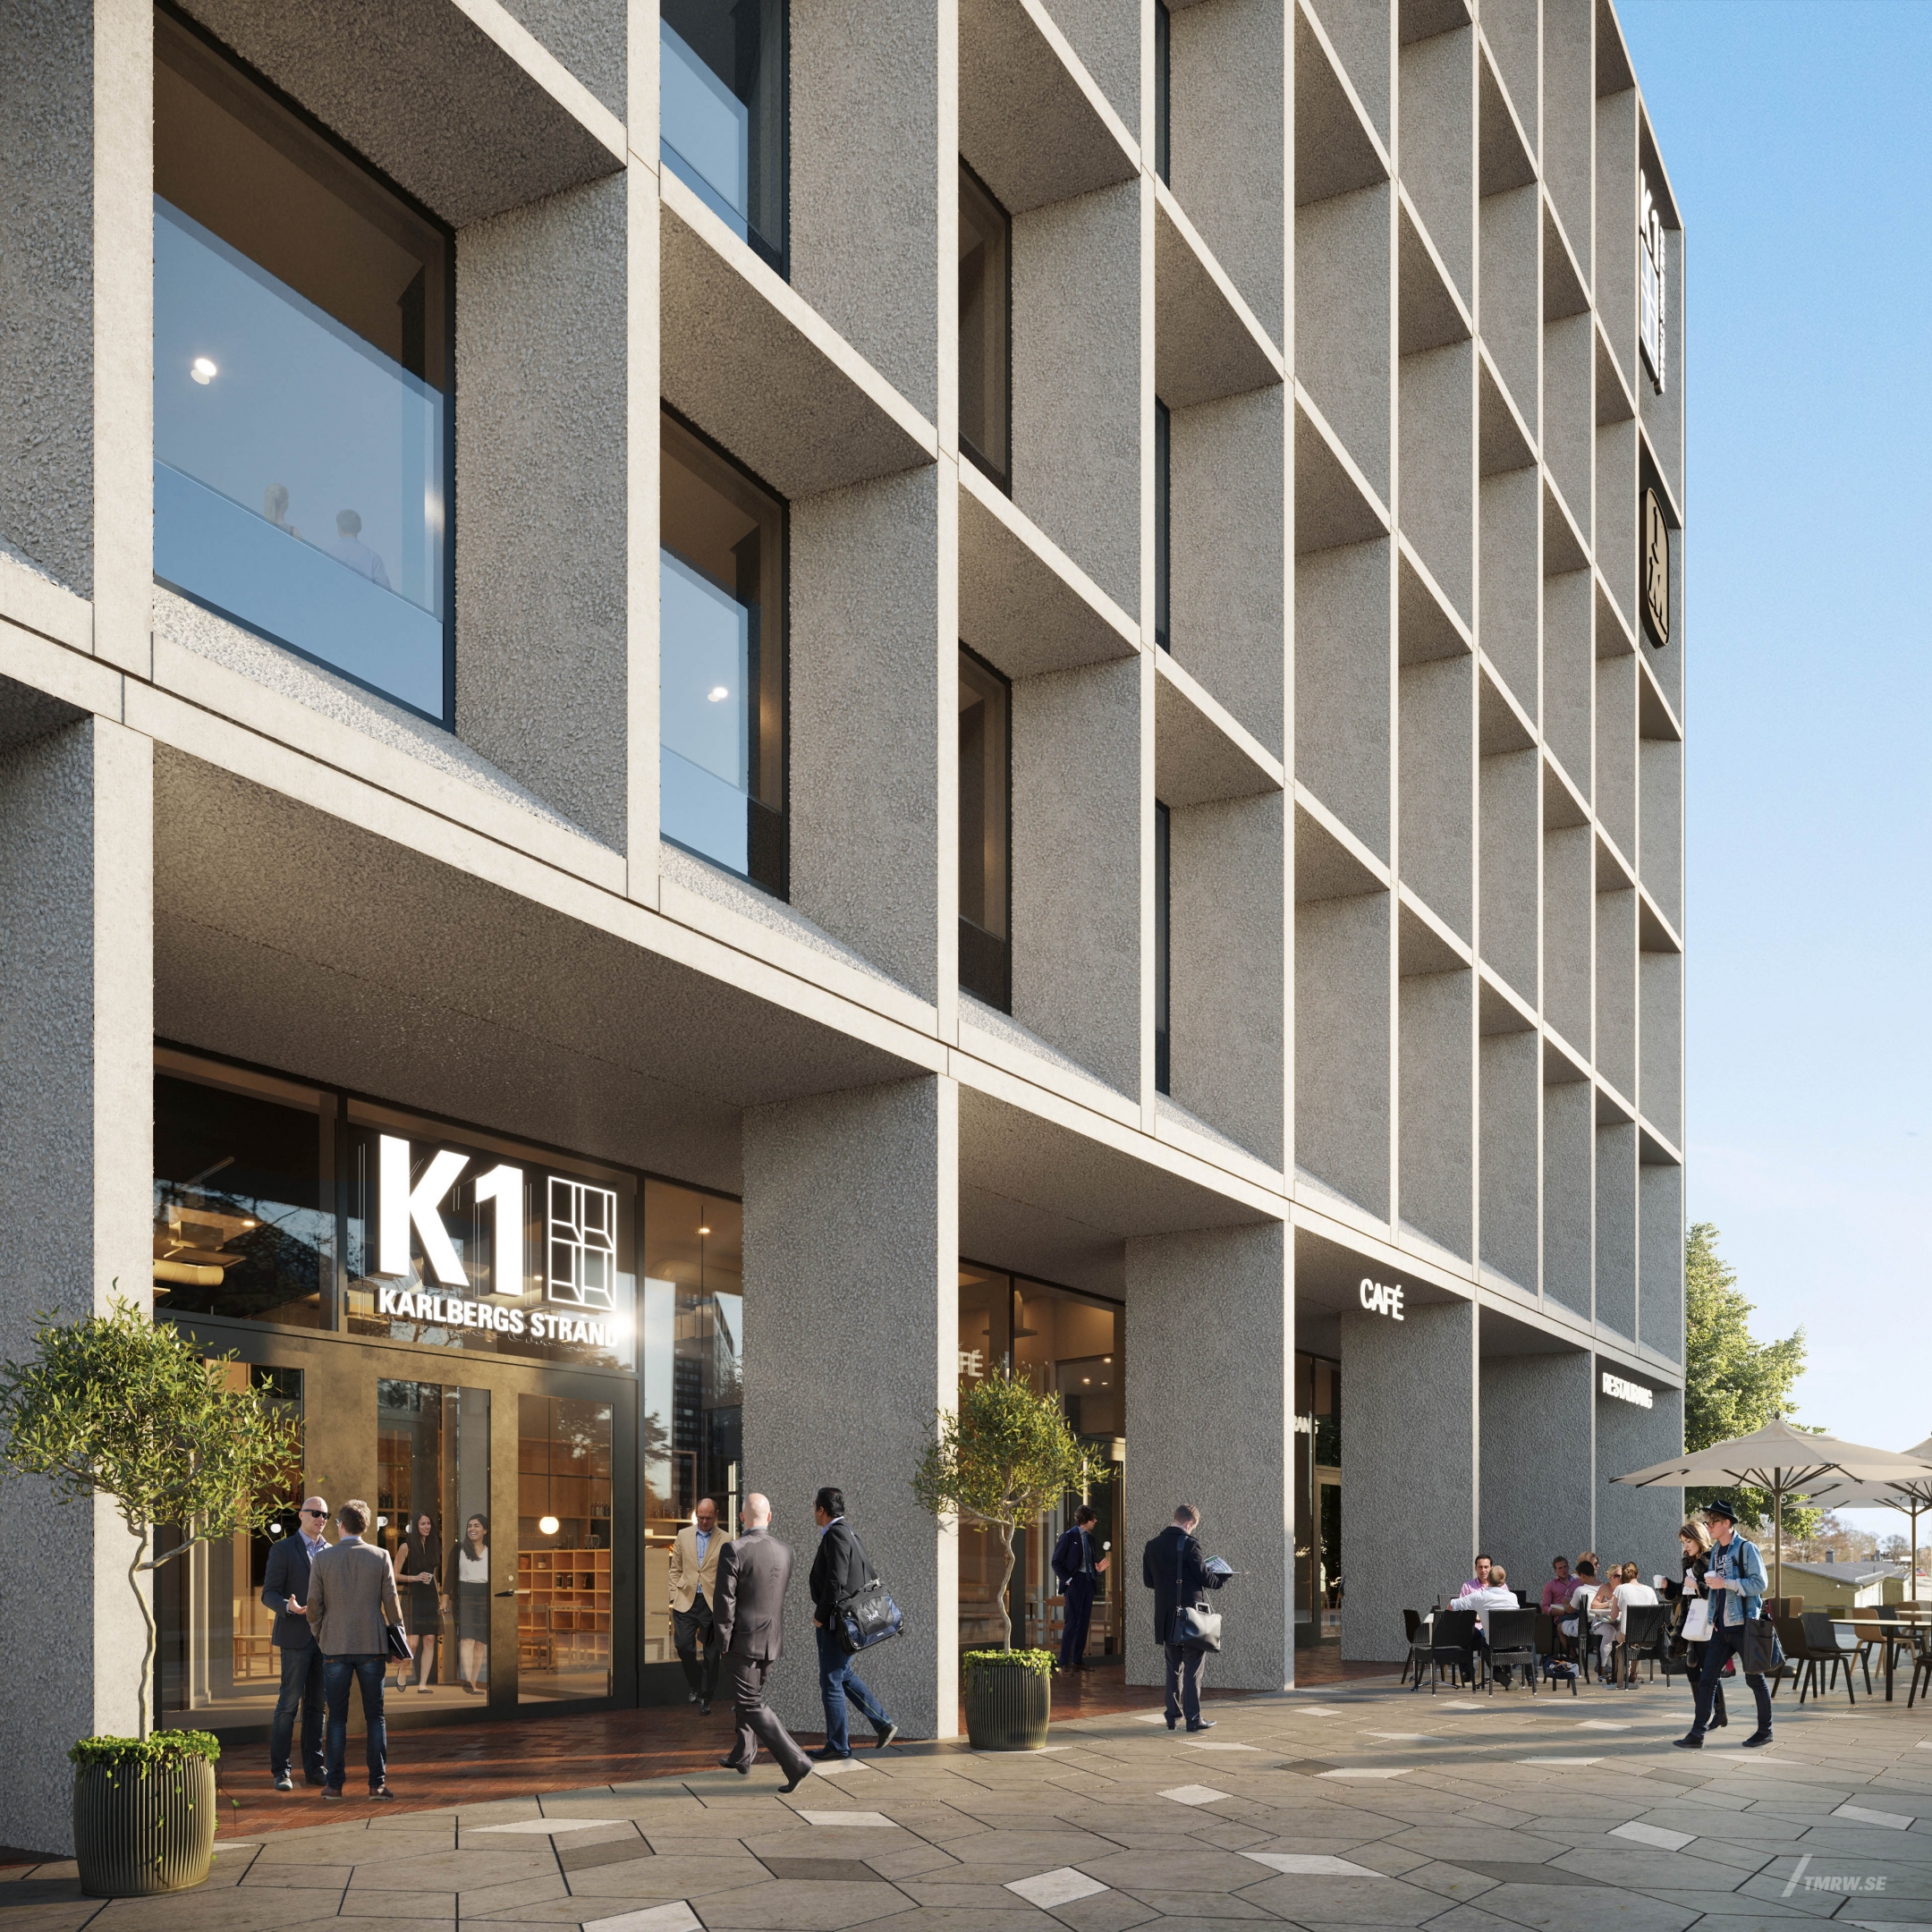 Architectural visualization of Karlberg Strand for JM a office building entrence in day light from a street view.